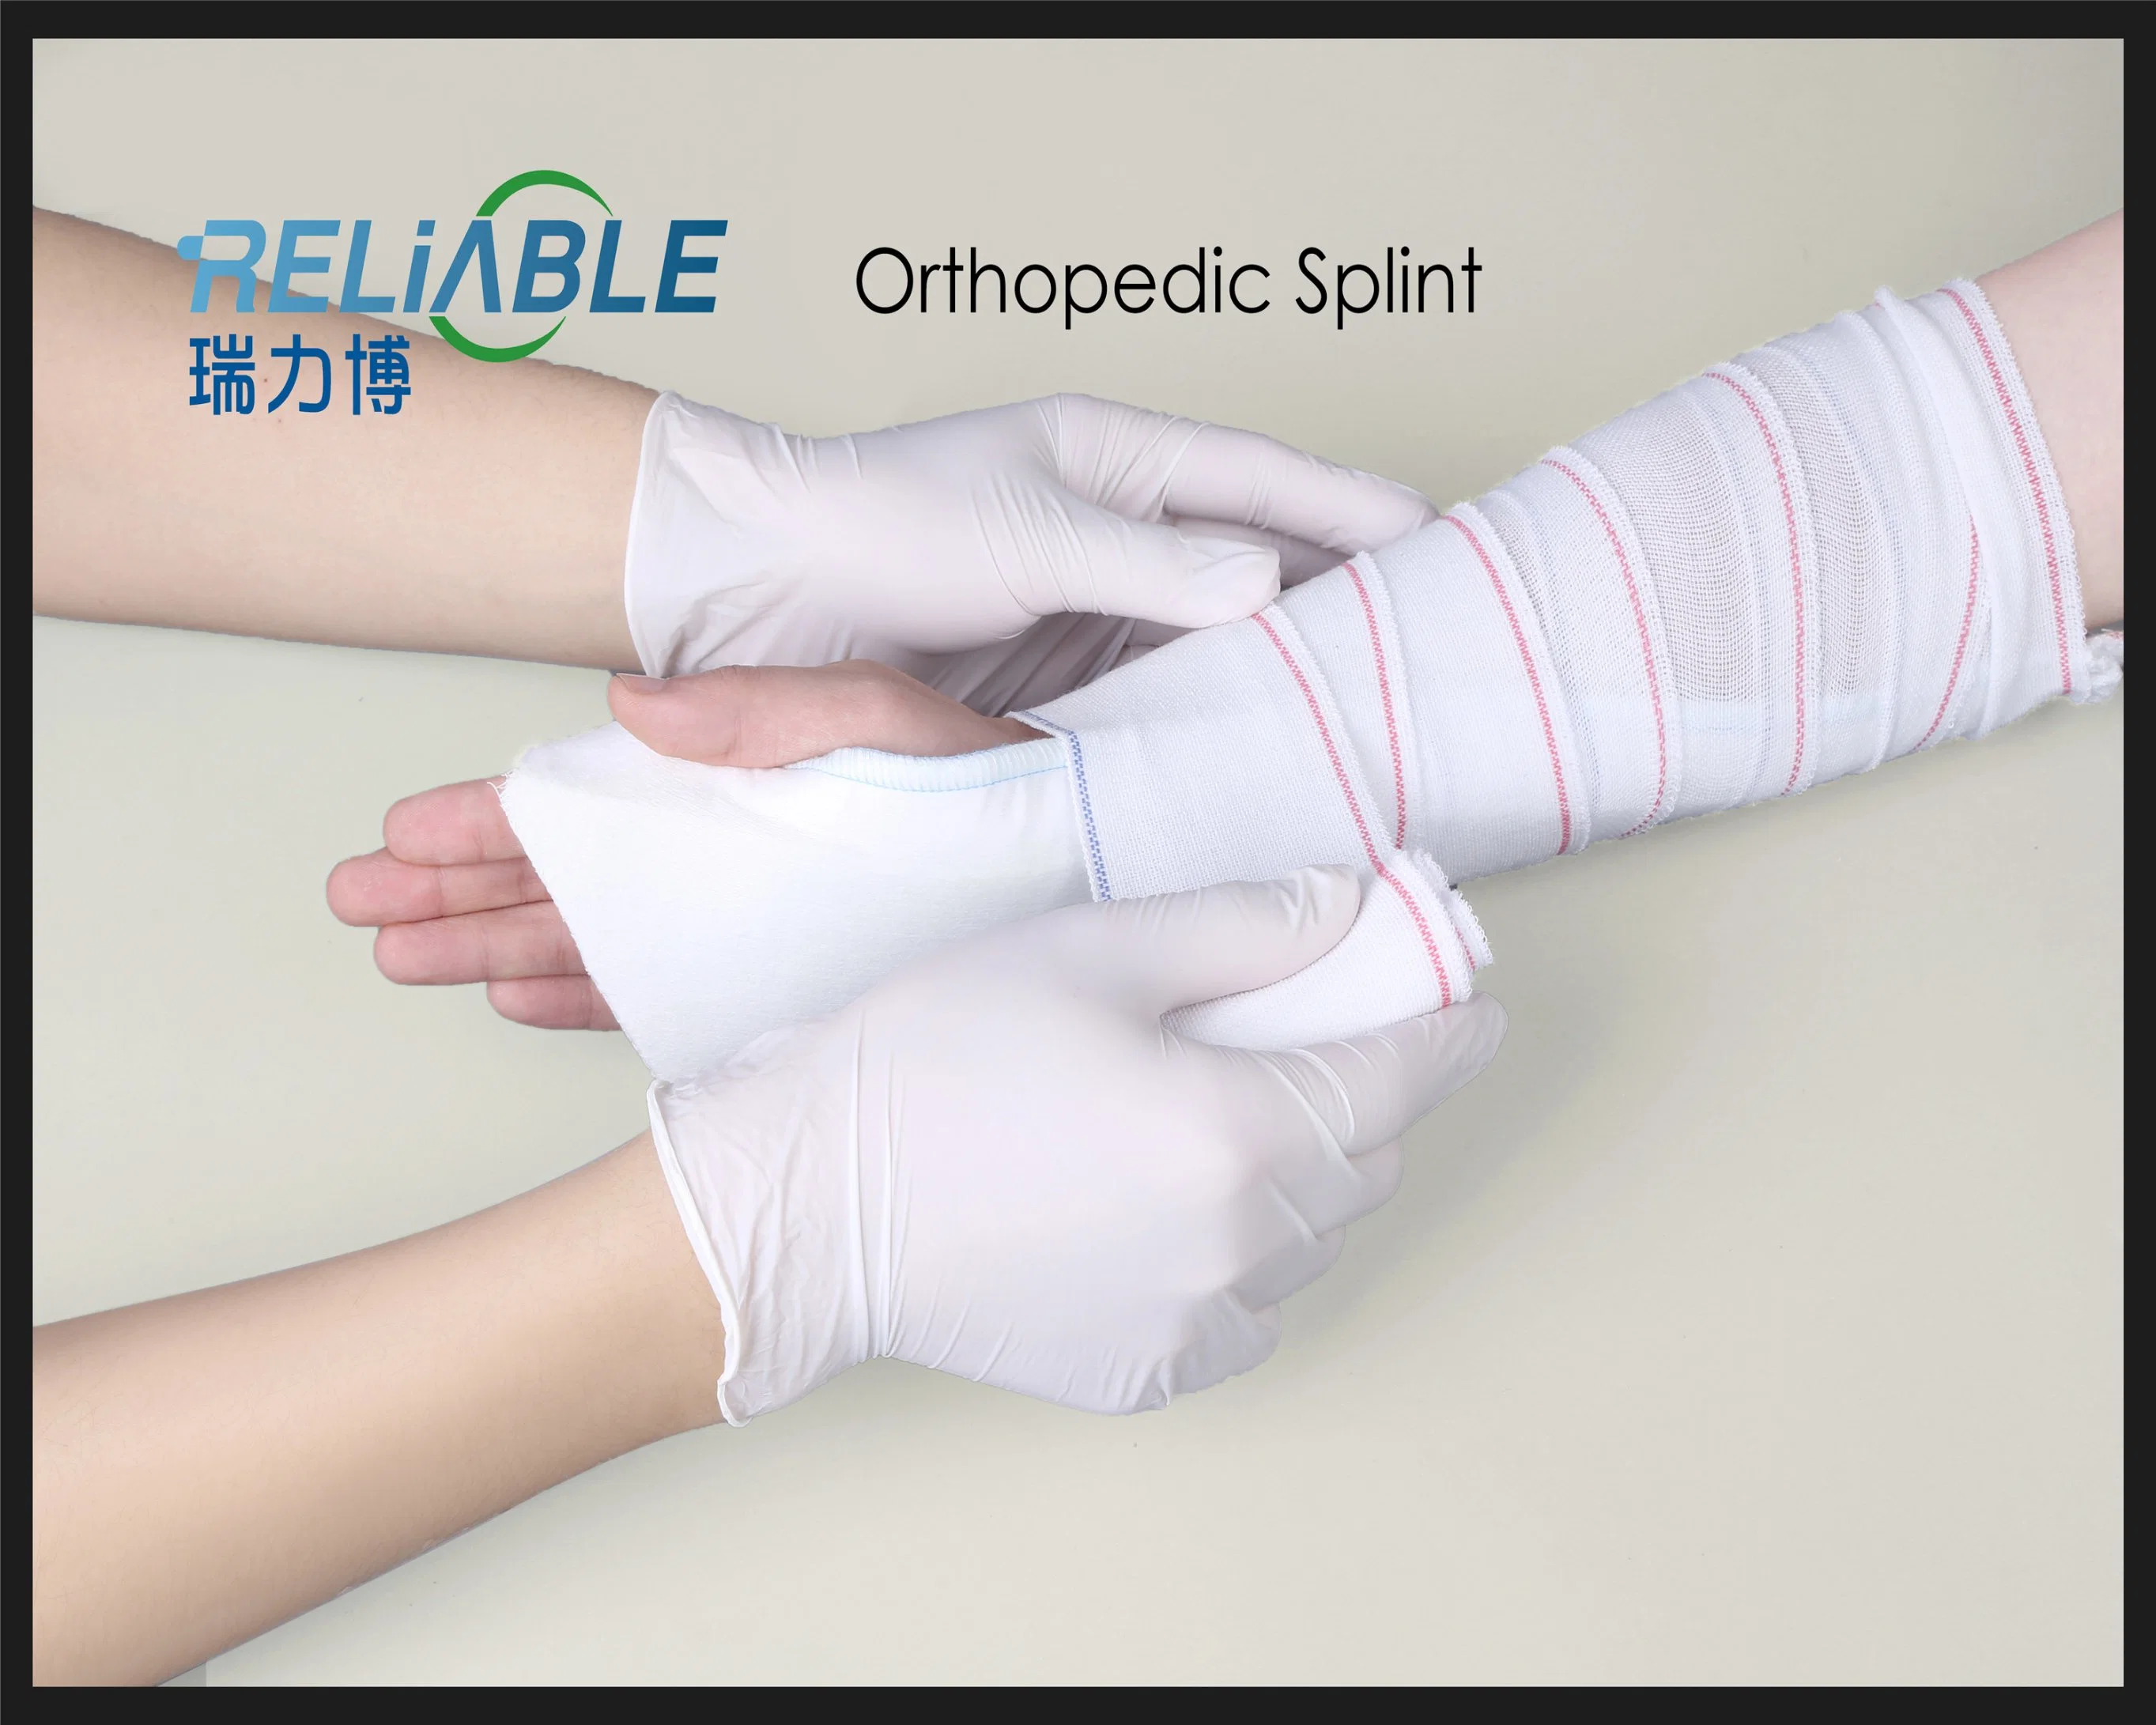 Medical First Aid Waterproof Splint for Legs and Arms for Orthopedic Use with CE Certificate